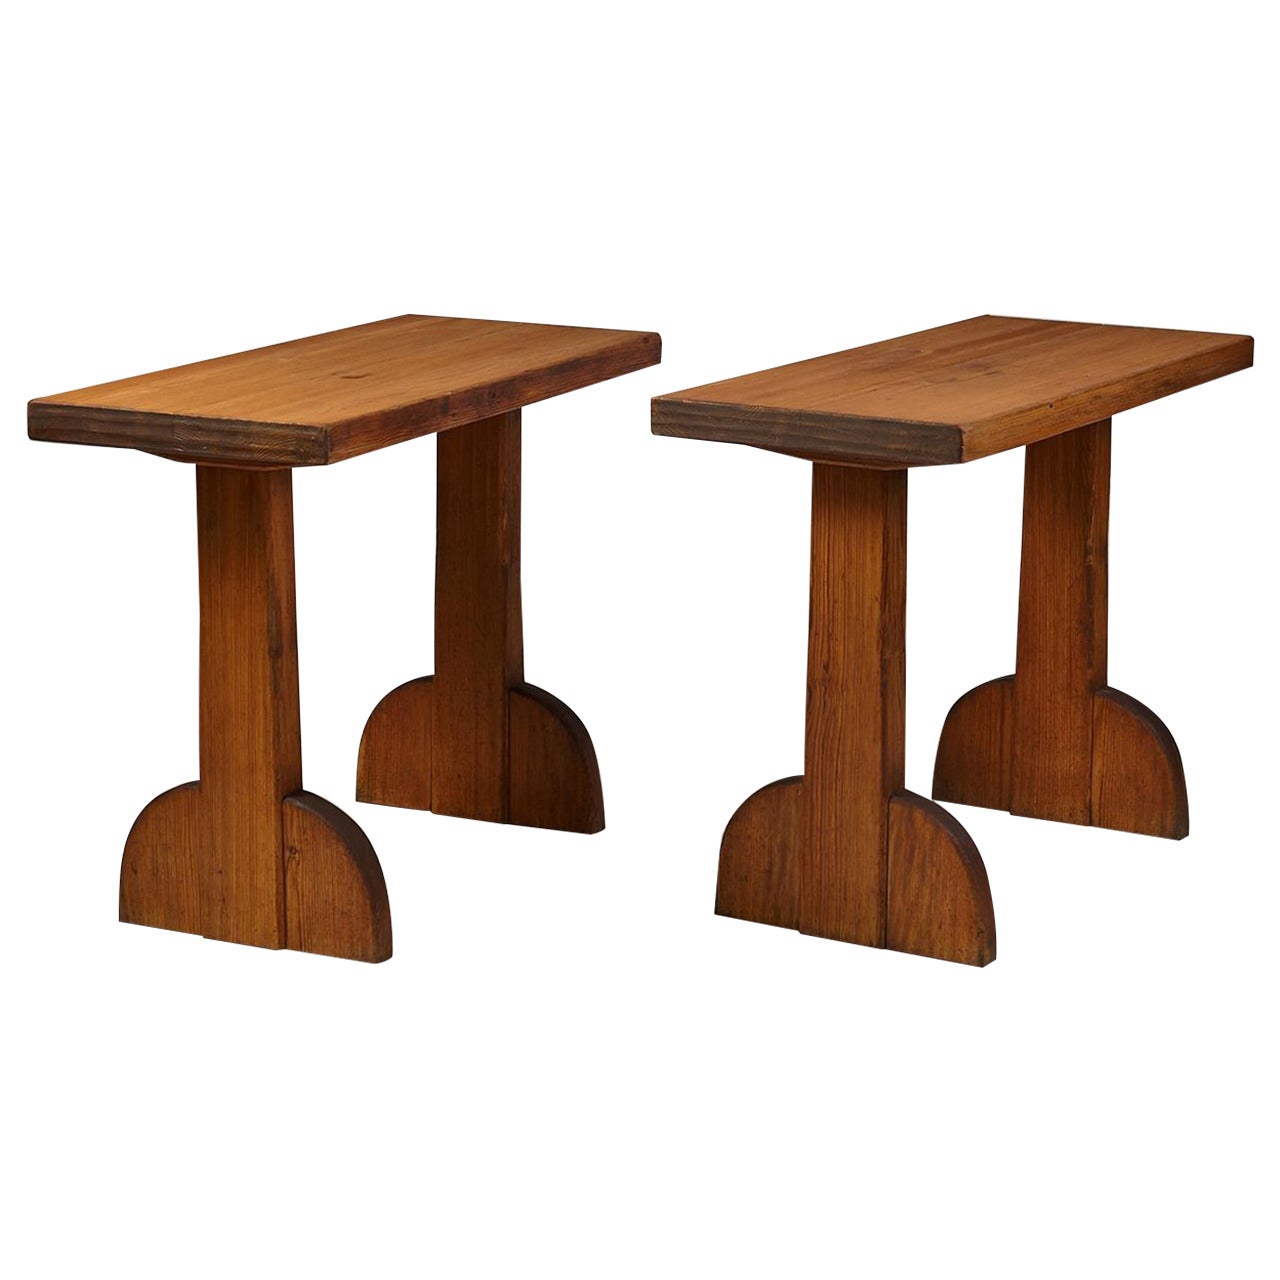 Console Tables Designed by Axel Einar Hjorth for NK, Sweden, 1932